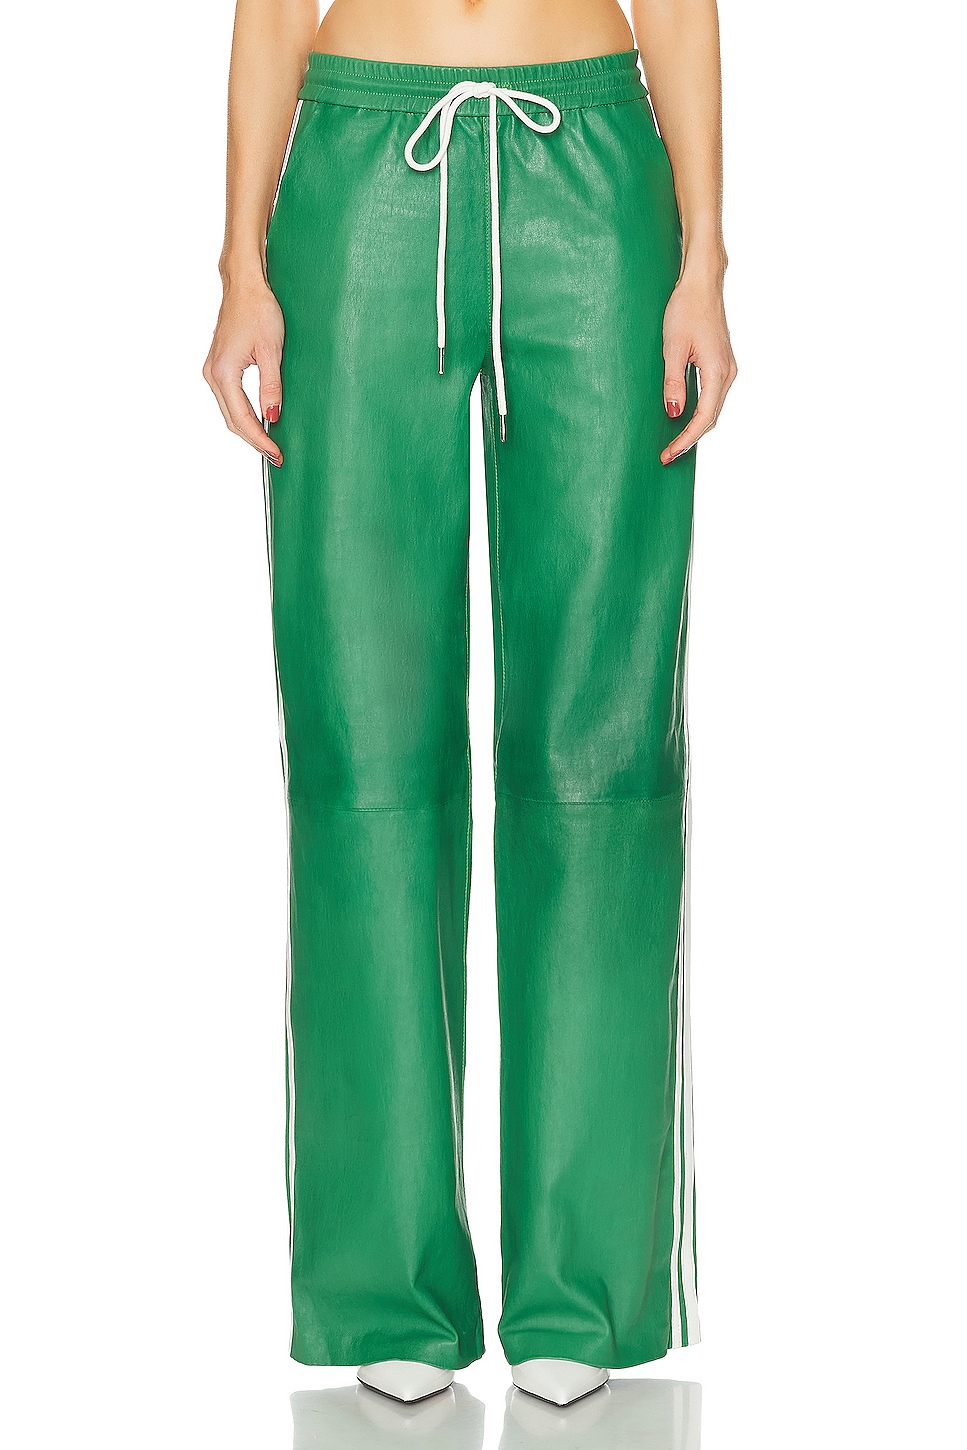 Image 1 of SPRWMN Baggy Athletic Sweatpant in Evergreen